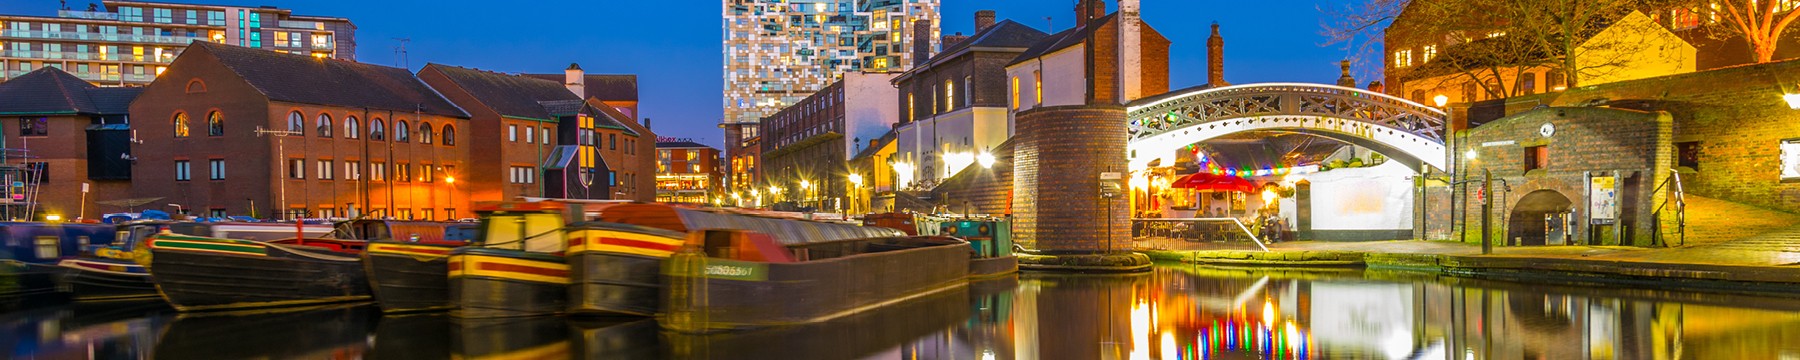 Panoramic view of the canals in Birmingham 